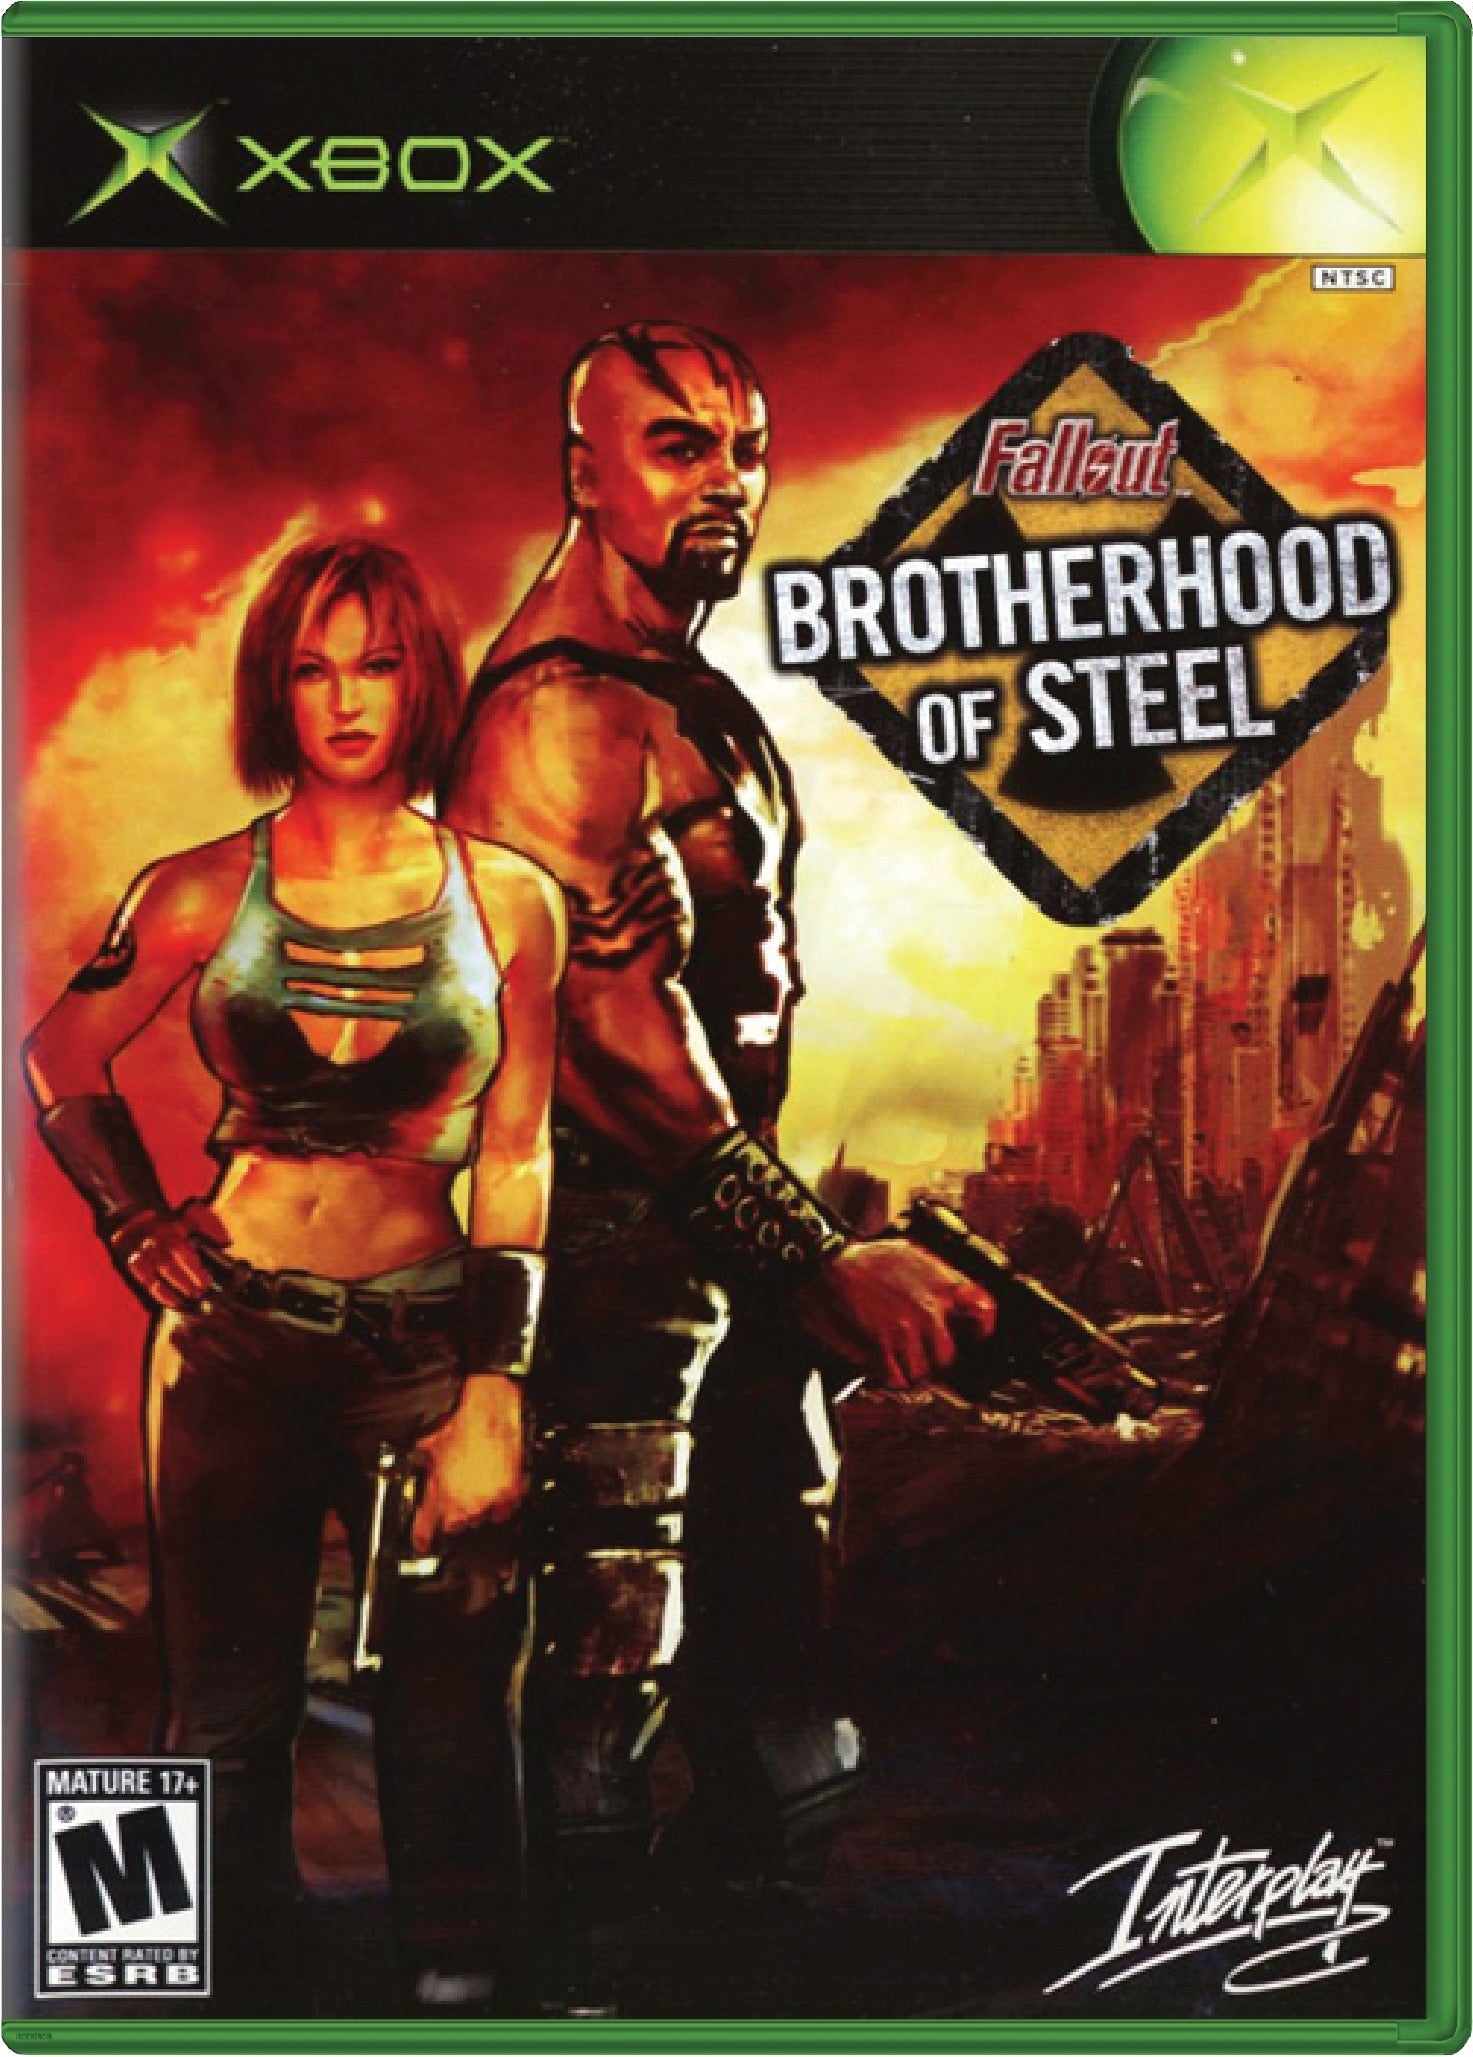 Fallout Brotherhood of Steel Cover Art